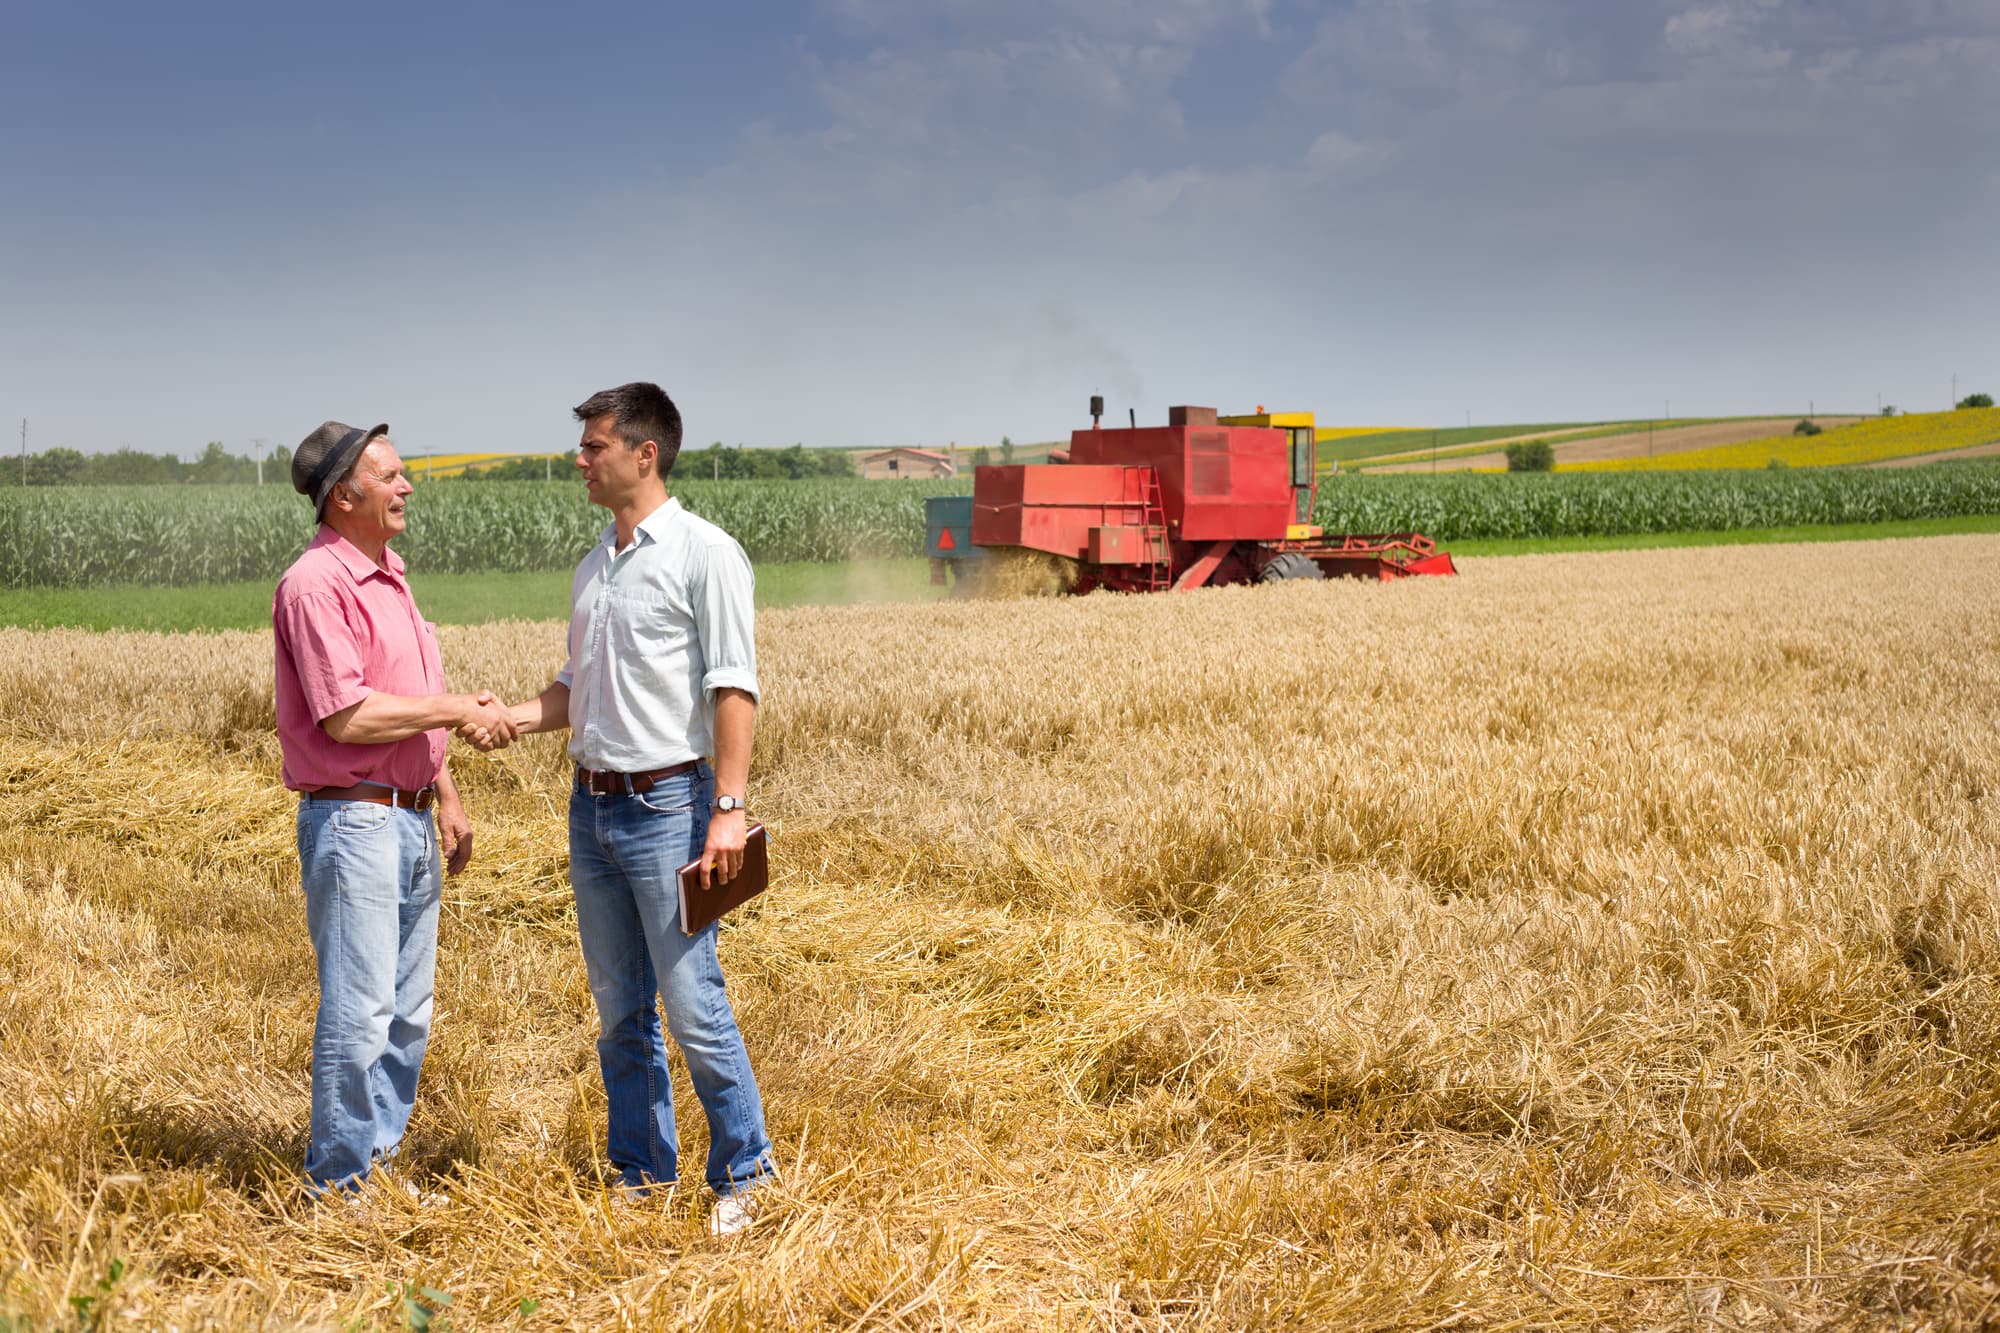 farmer shaking hands with salesman over equipment